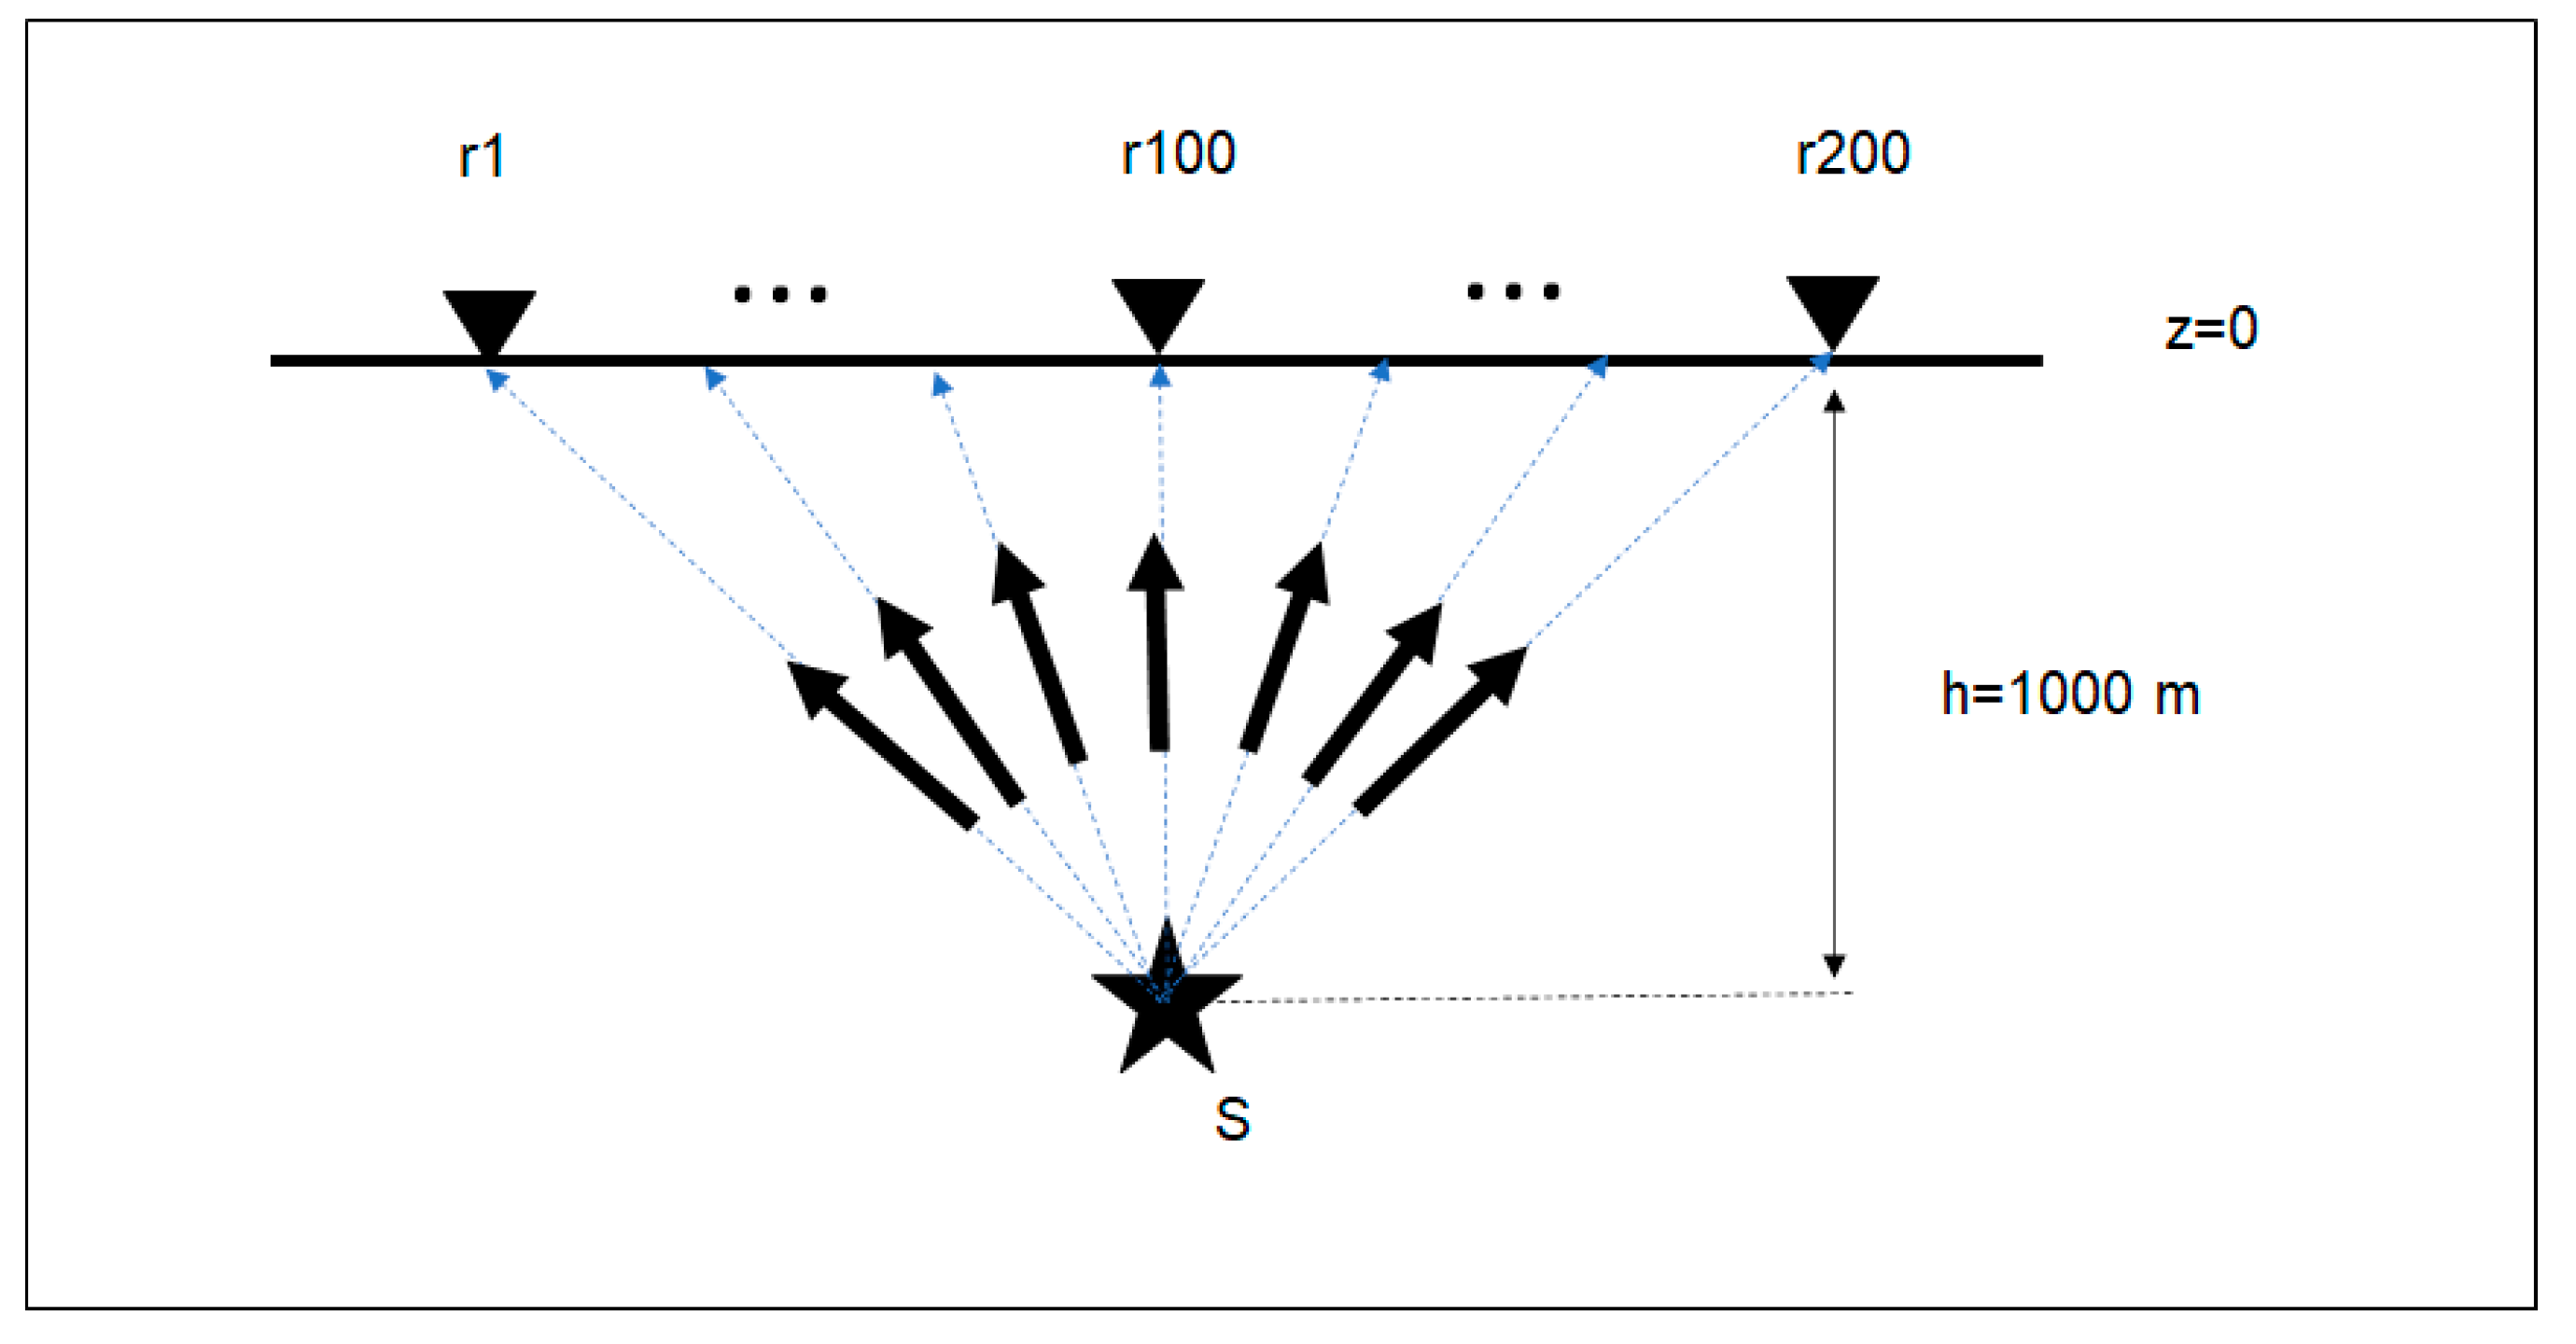 FDSF for three phases of the signal.